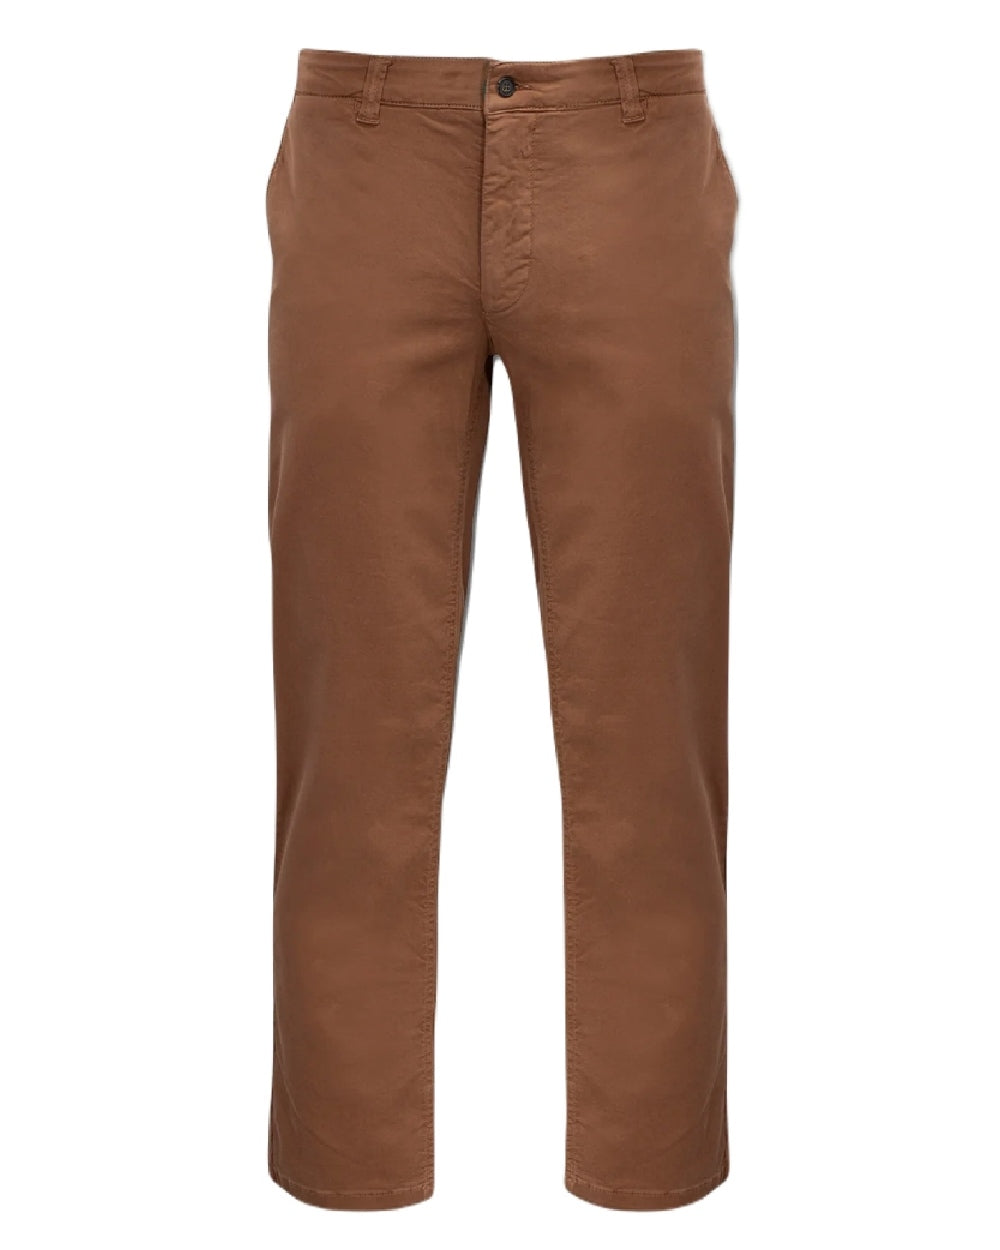 Alan Paine Bamforth Chino Trousers in Taupe 